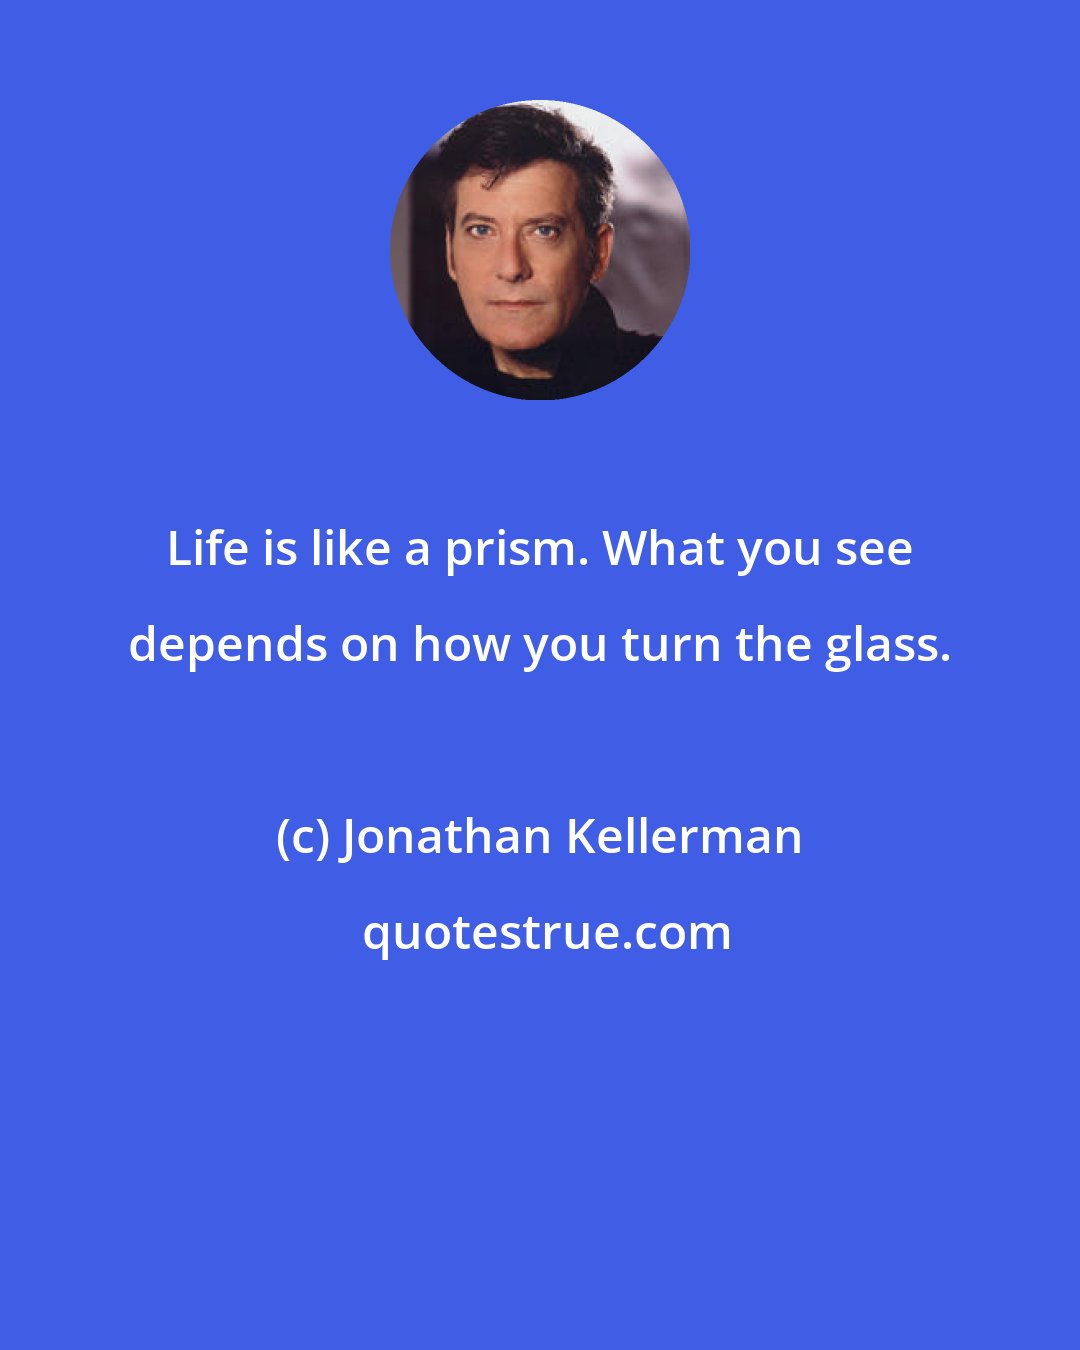 Jonathan Kellerman: Life is like a prism. What you see depends on how you turn the glass.